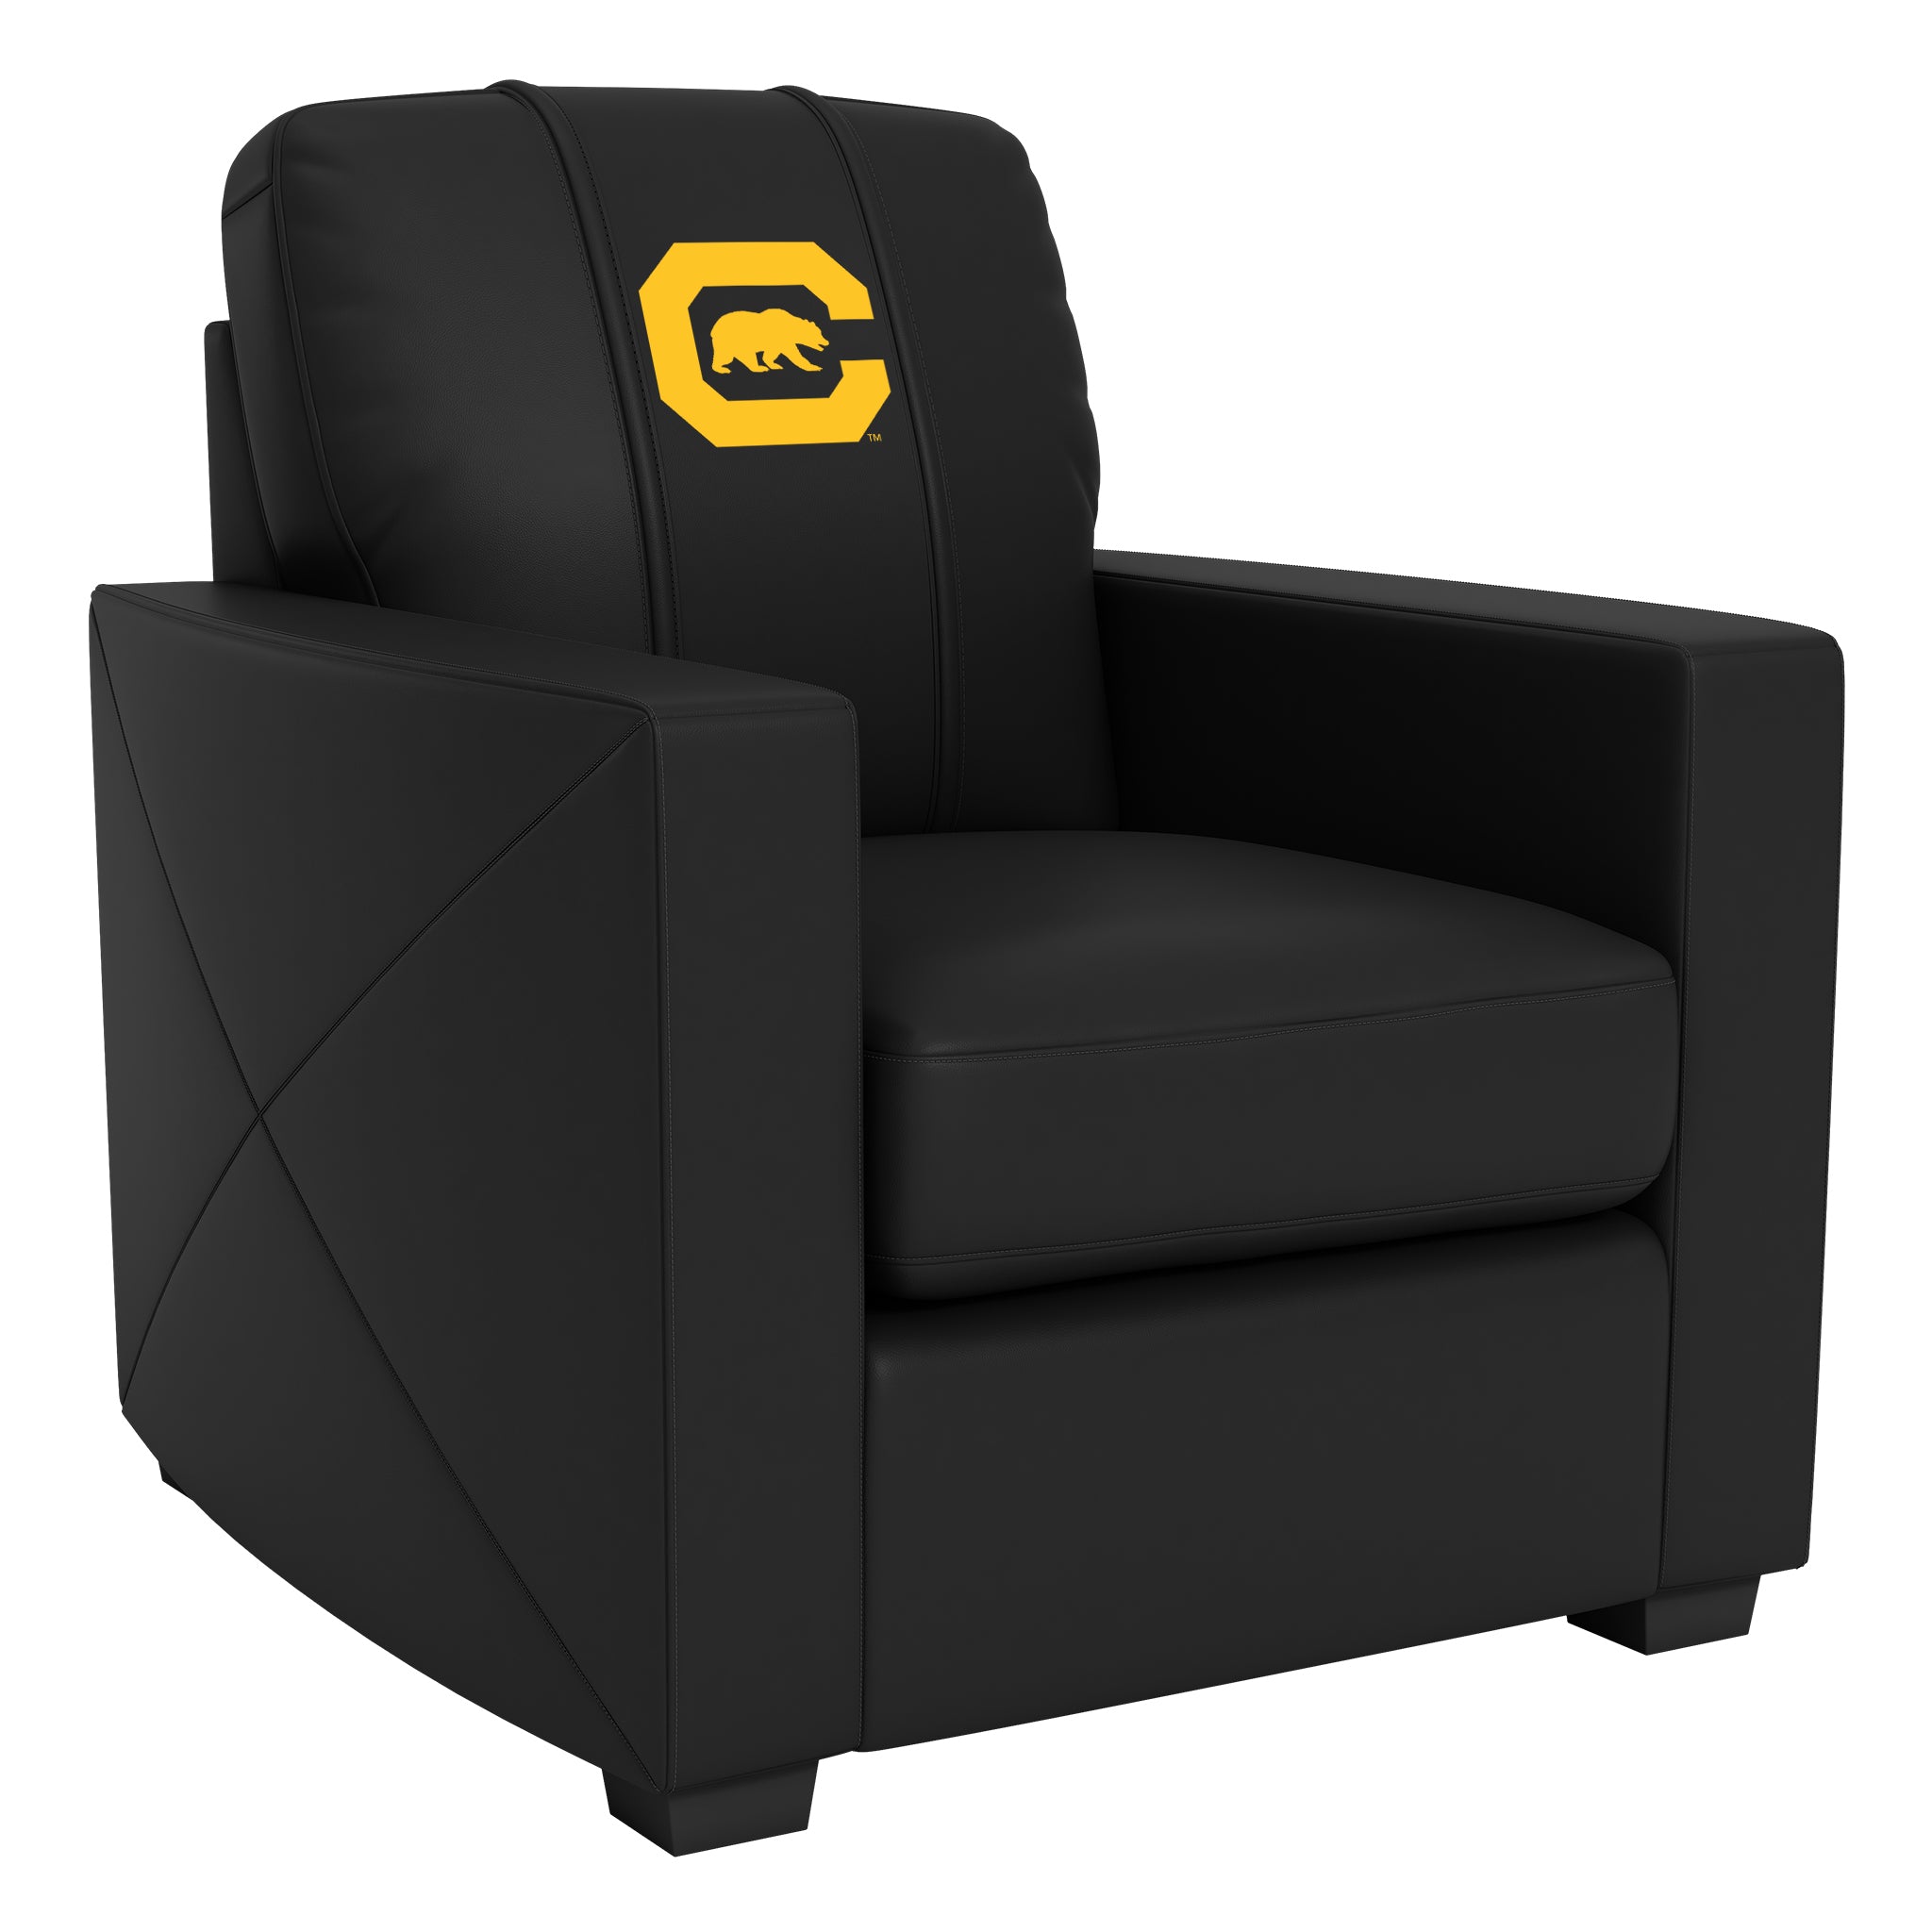 California Golden Bears Silver Club Chair with California Golden Bears Secondary Logo